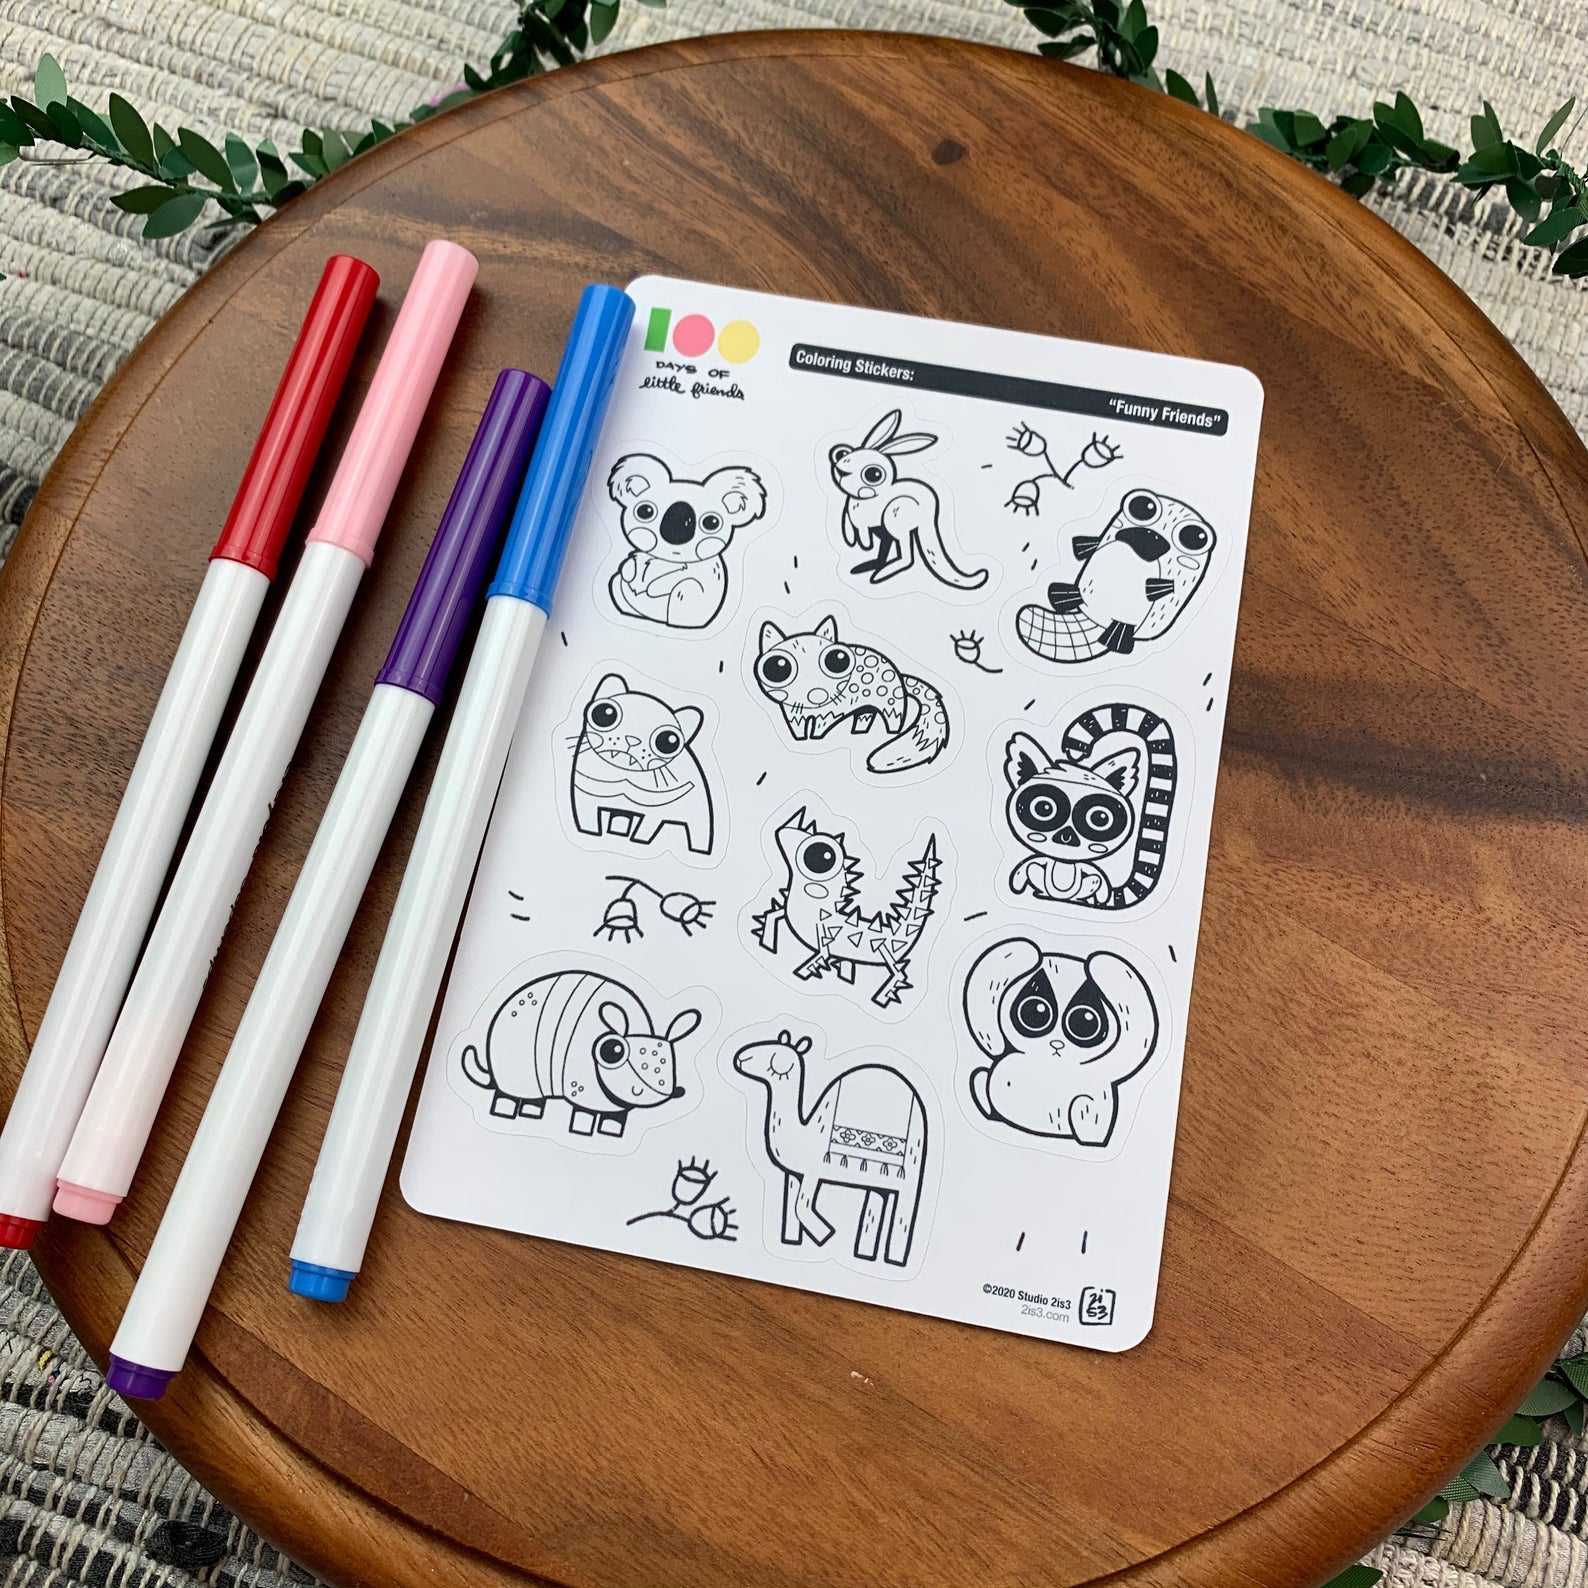 Markers and a sticker sheet with 10 little animal stickers on it. A Koala, Kangaroo, Platypus, Quoll, Tasmanian Devil, Thorny Devil, Lemur, Armadillo, Camel, and a Slow Loris.